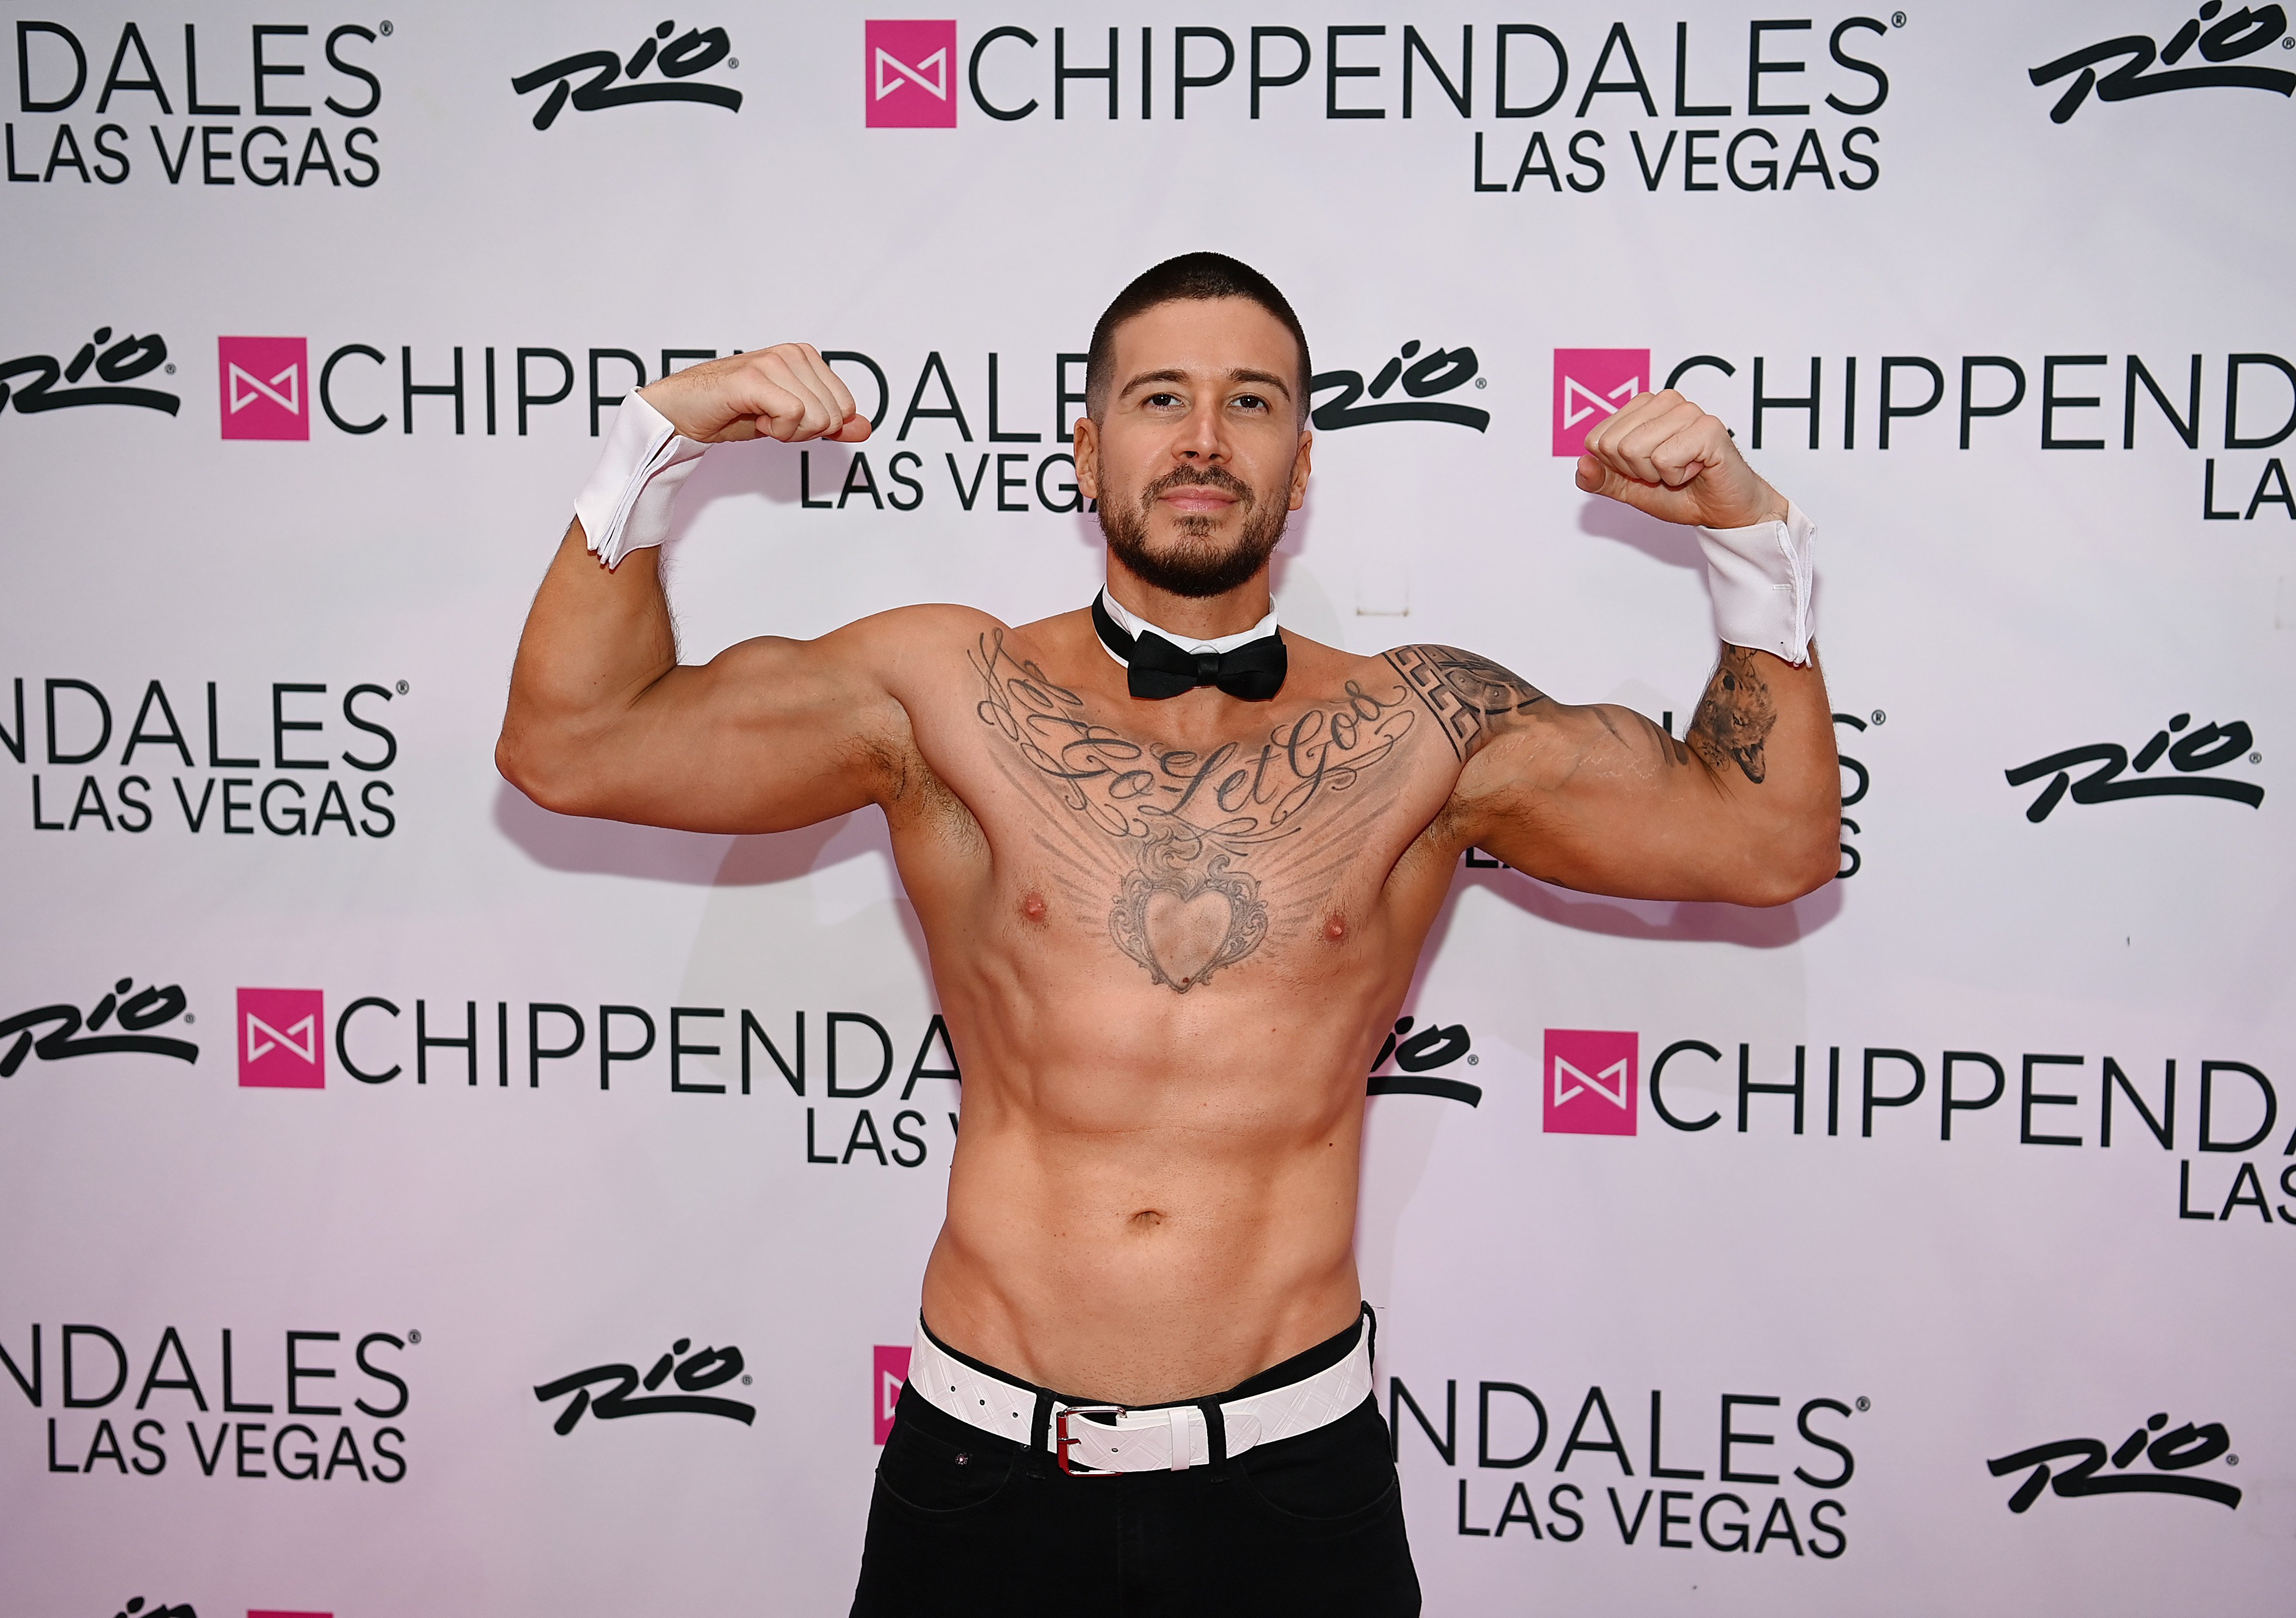 Vinny Guadagnino poses in front of a step-and-repeat for Chippendales Las Vegas